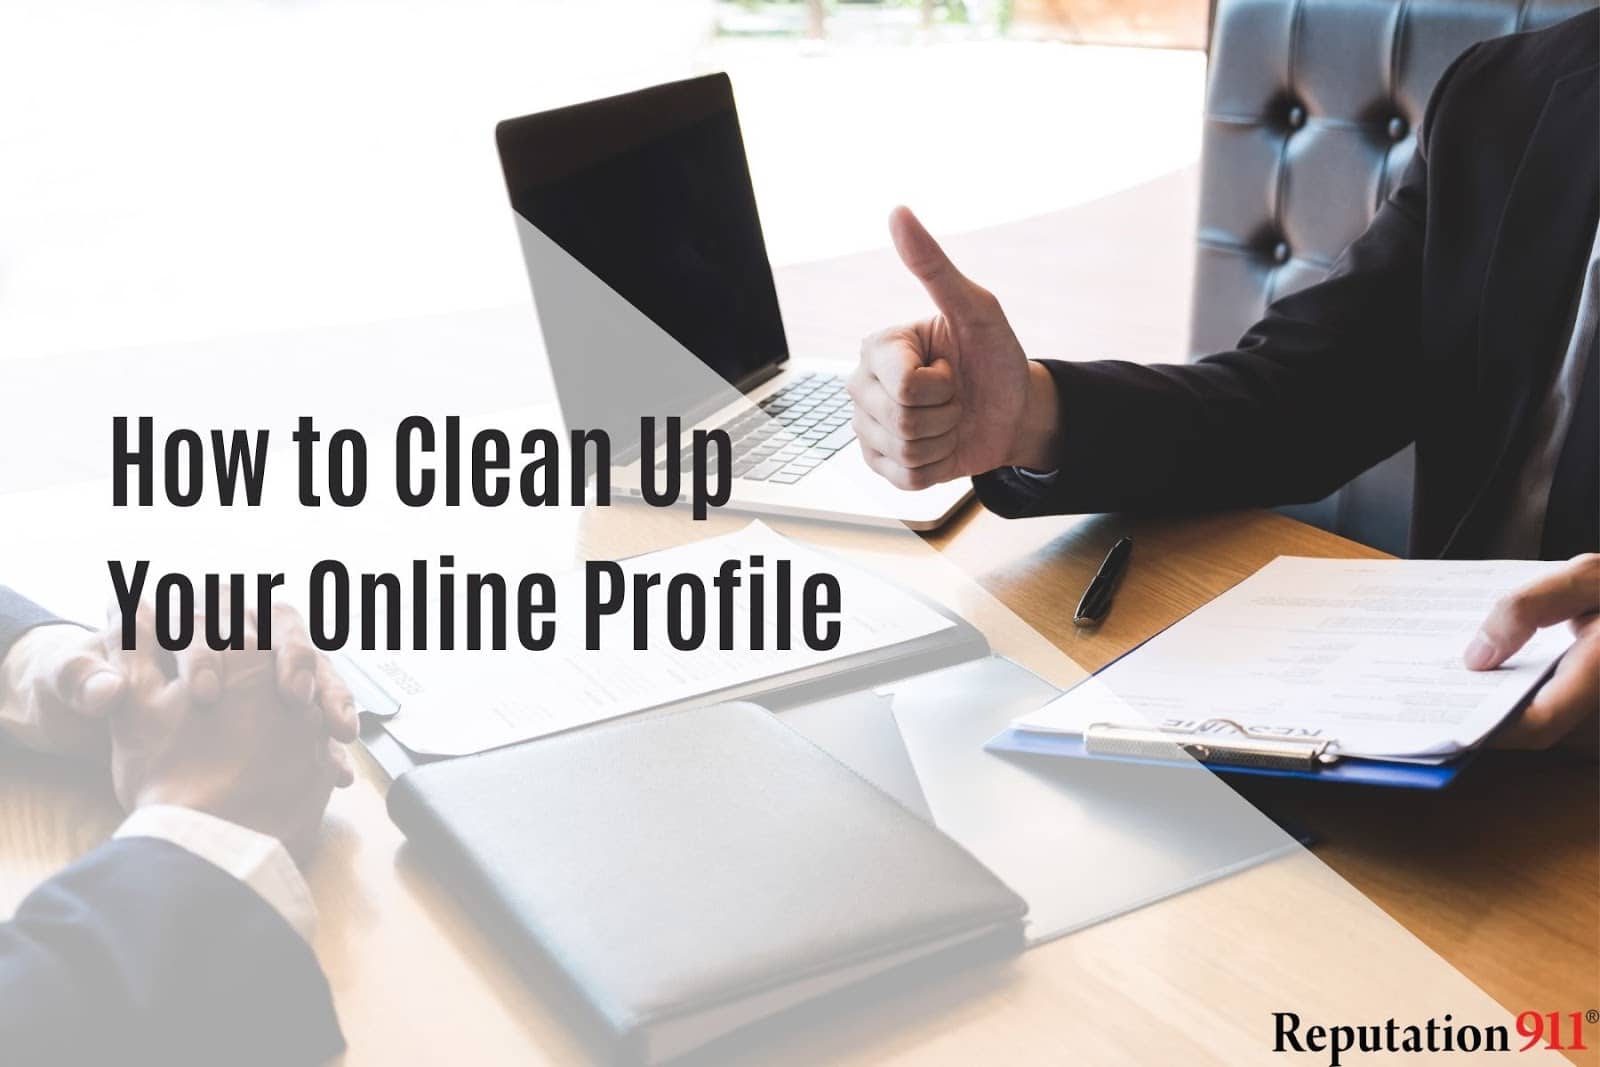 7 Tips For Cleaning Up Your Online Profile | Reputation911